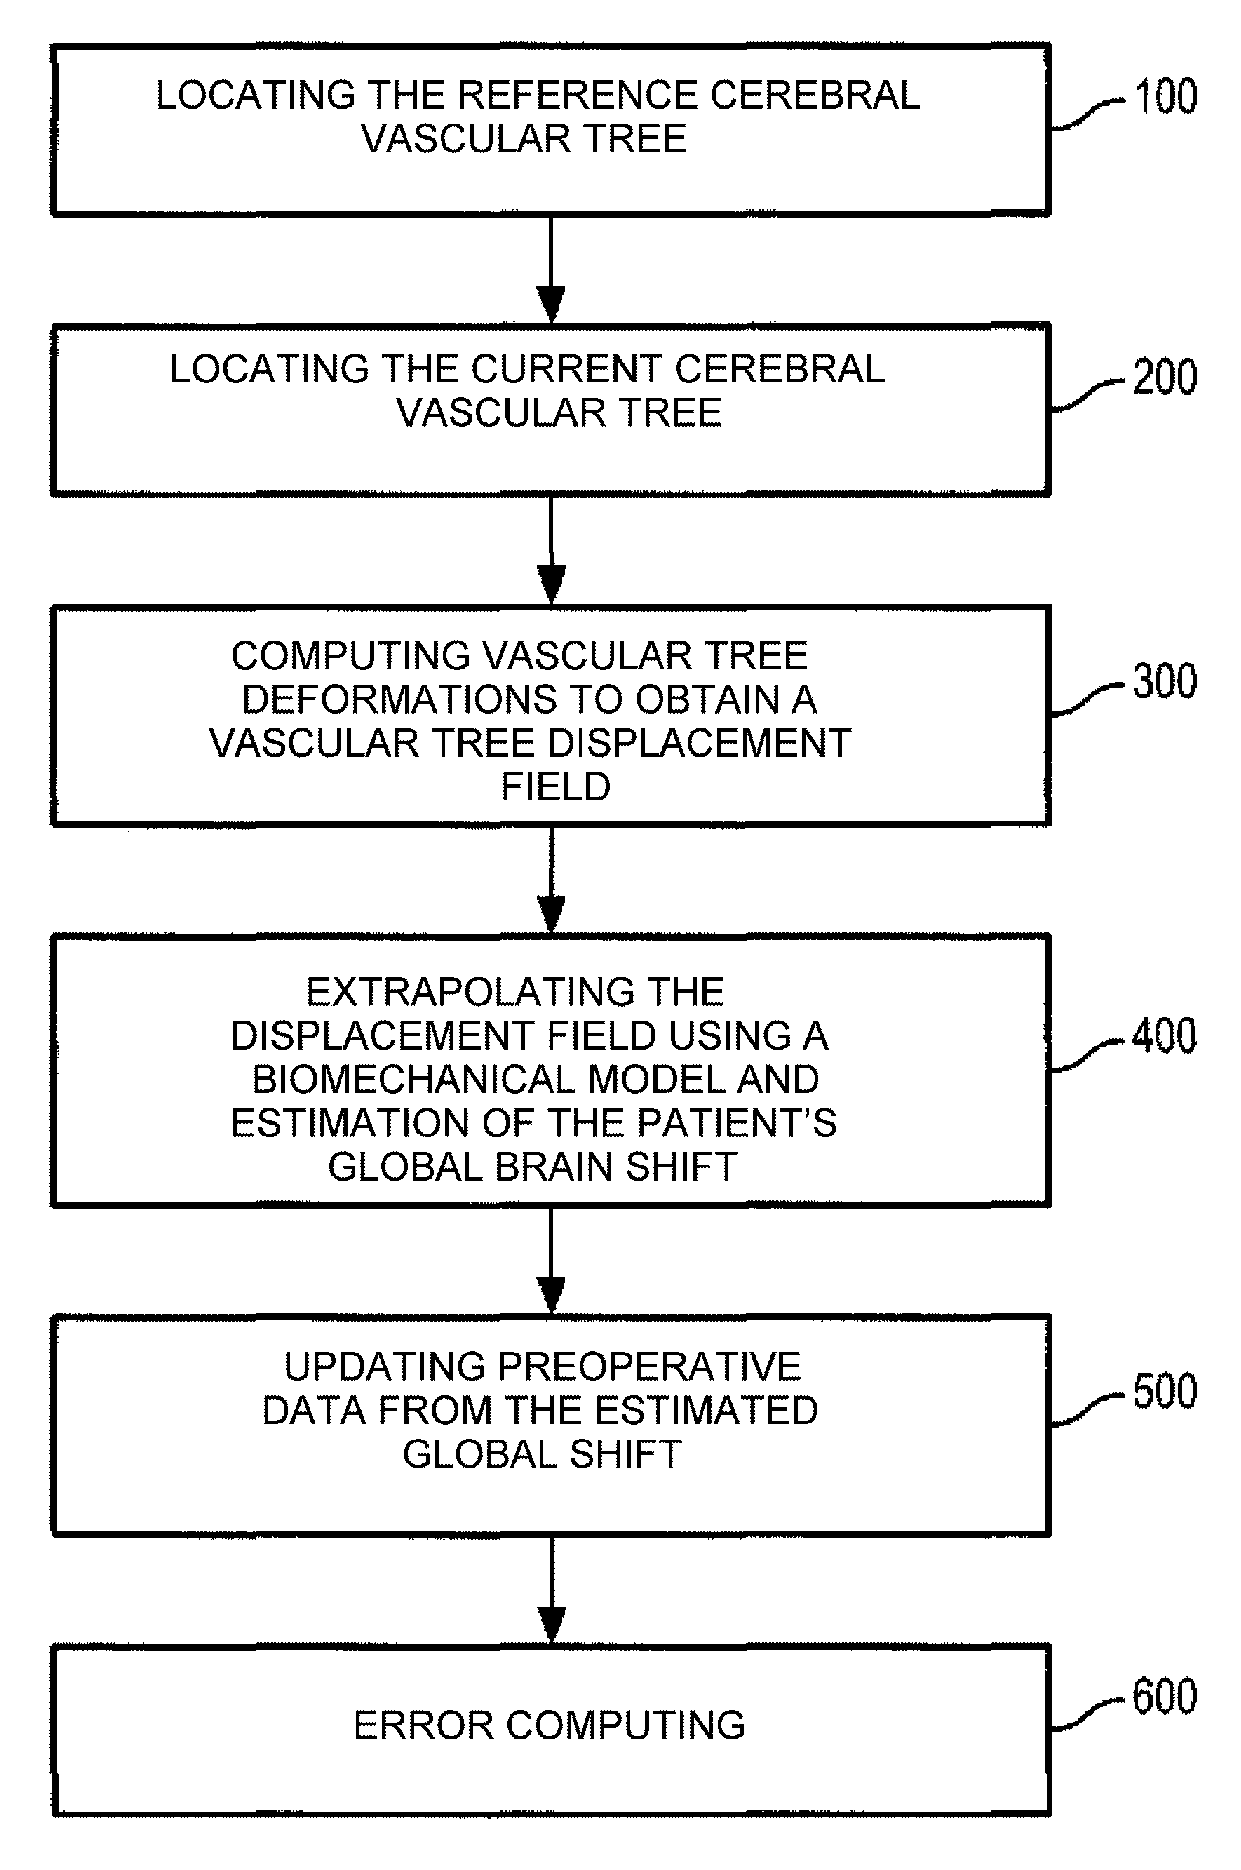 Image processing method for estimating a brain shift